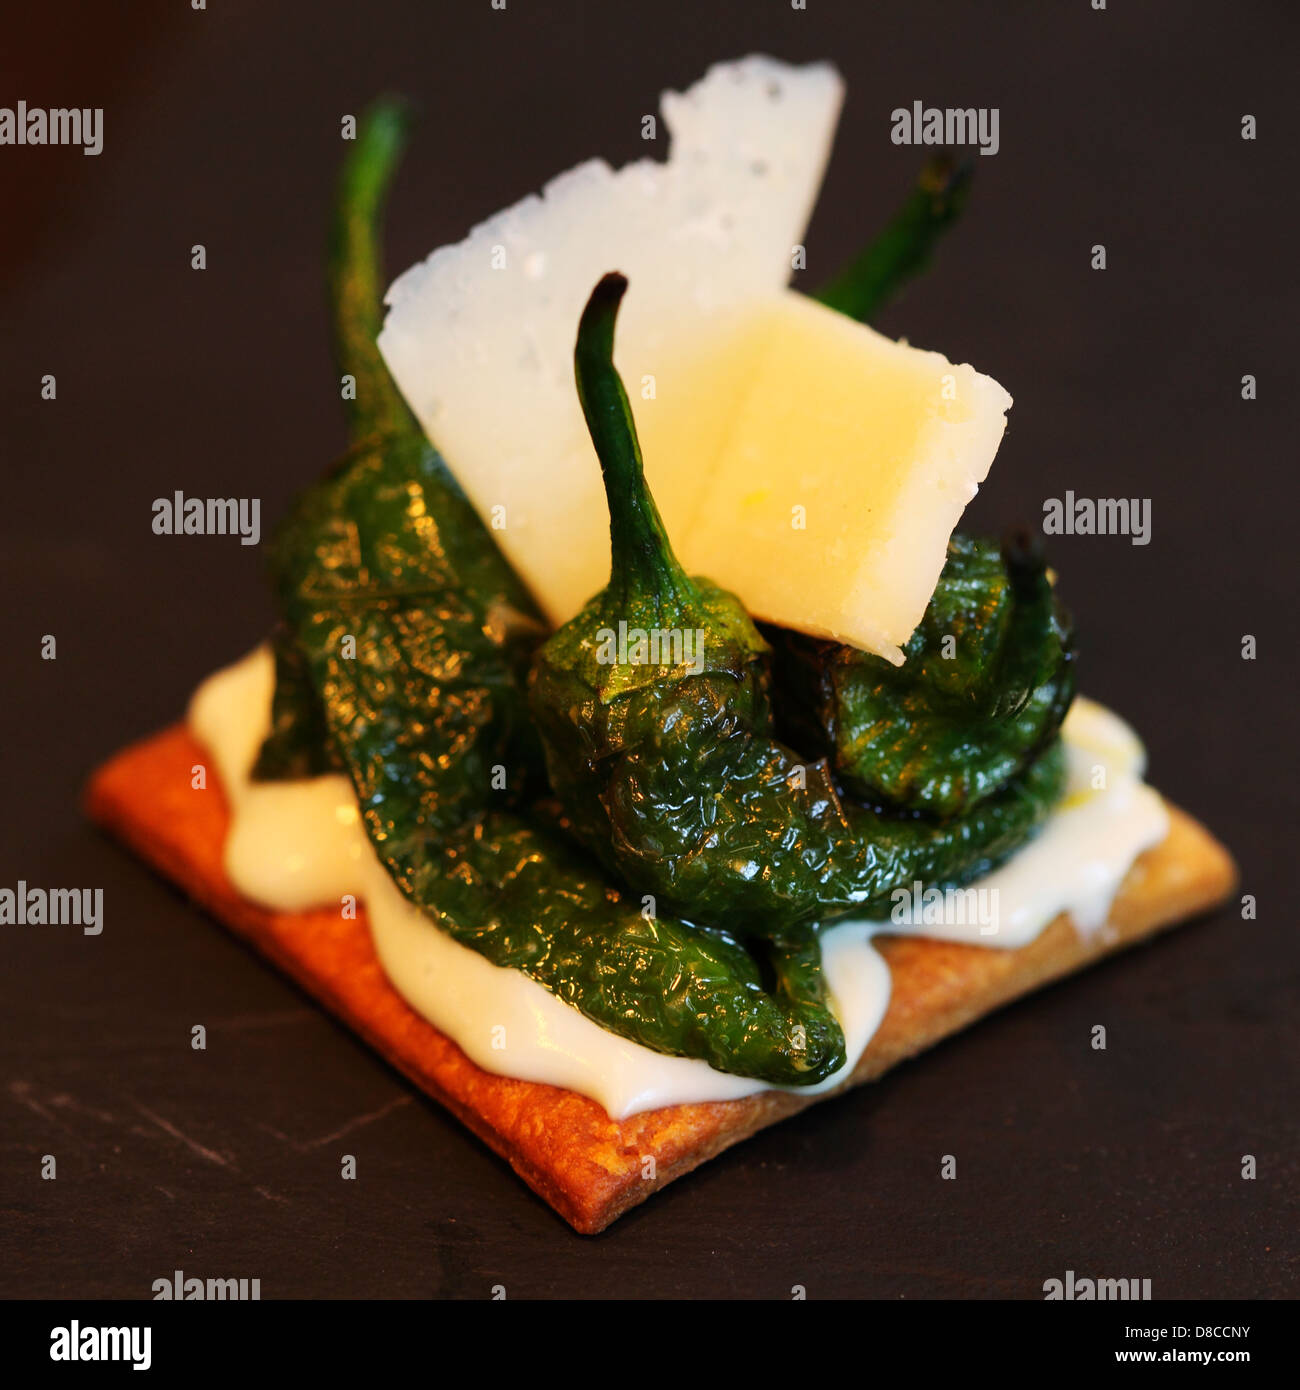 A Pincho (bite sized Tapas served on freshly cooked bread) of Padron peppers, cream cheese, lemon and Parmesan cheese. Stock Photo